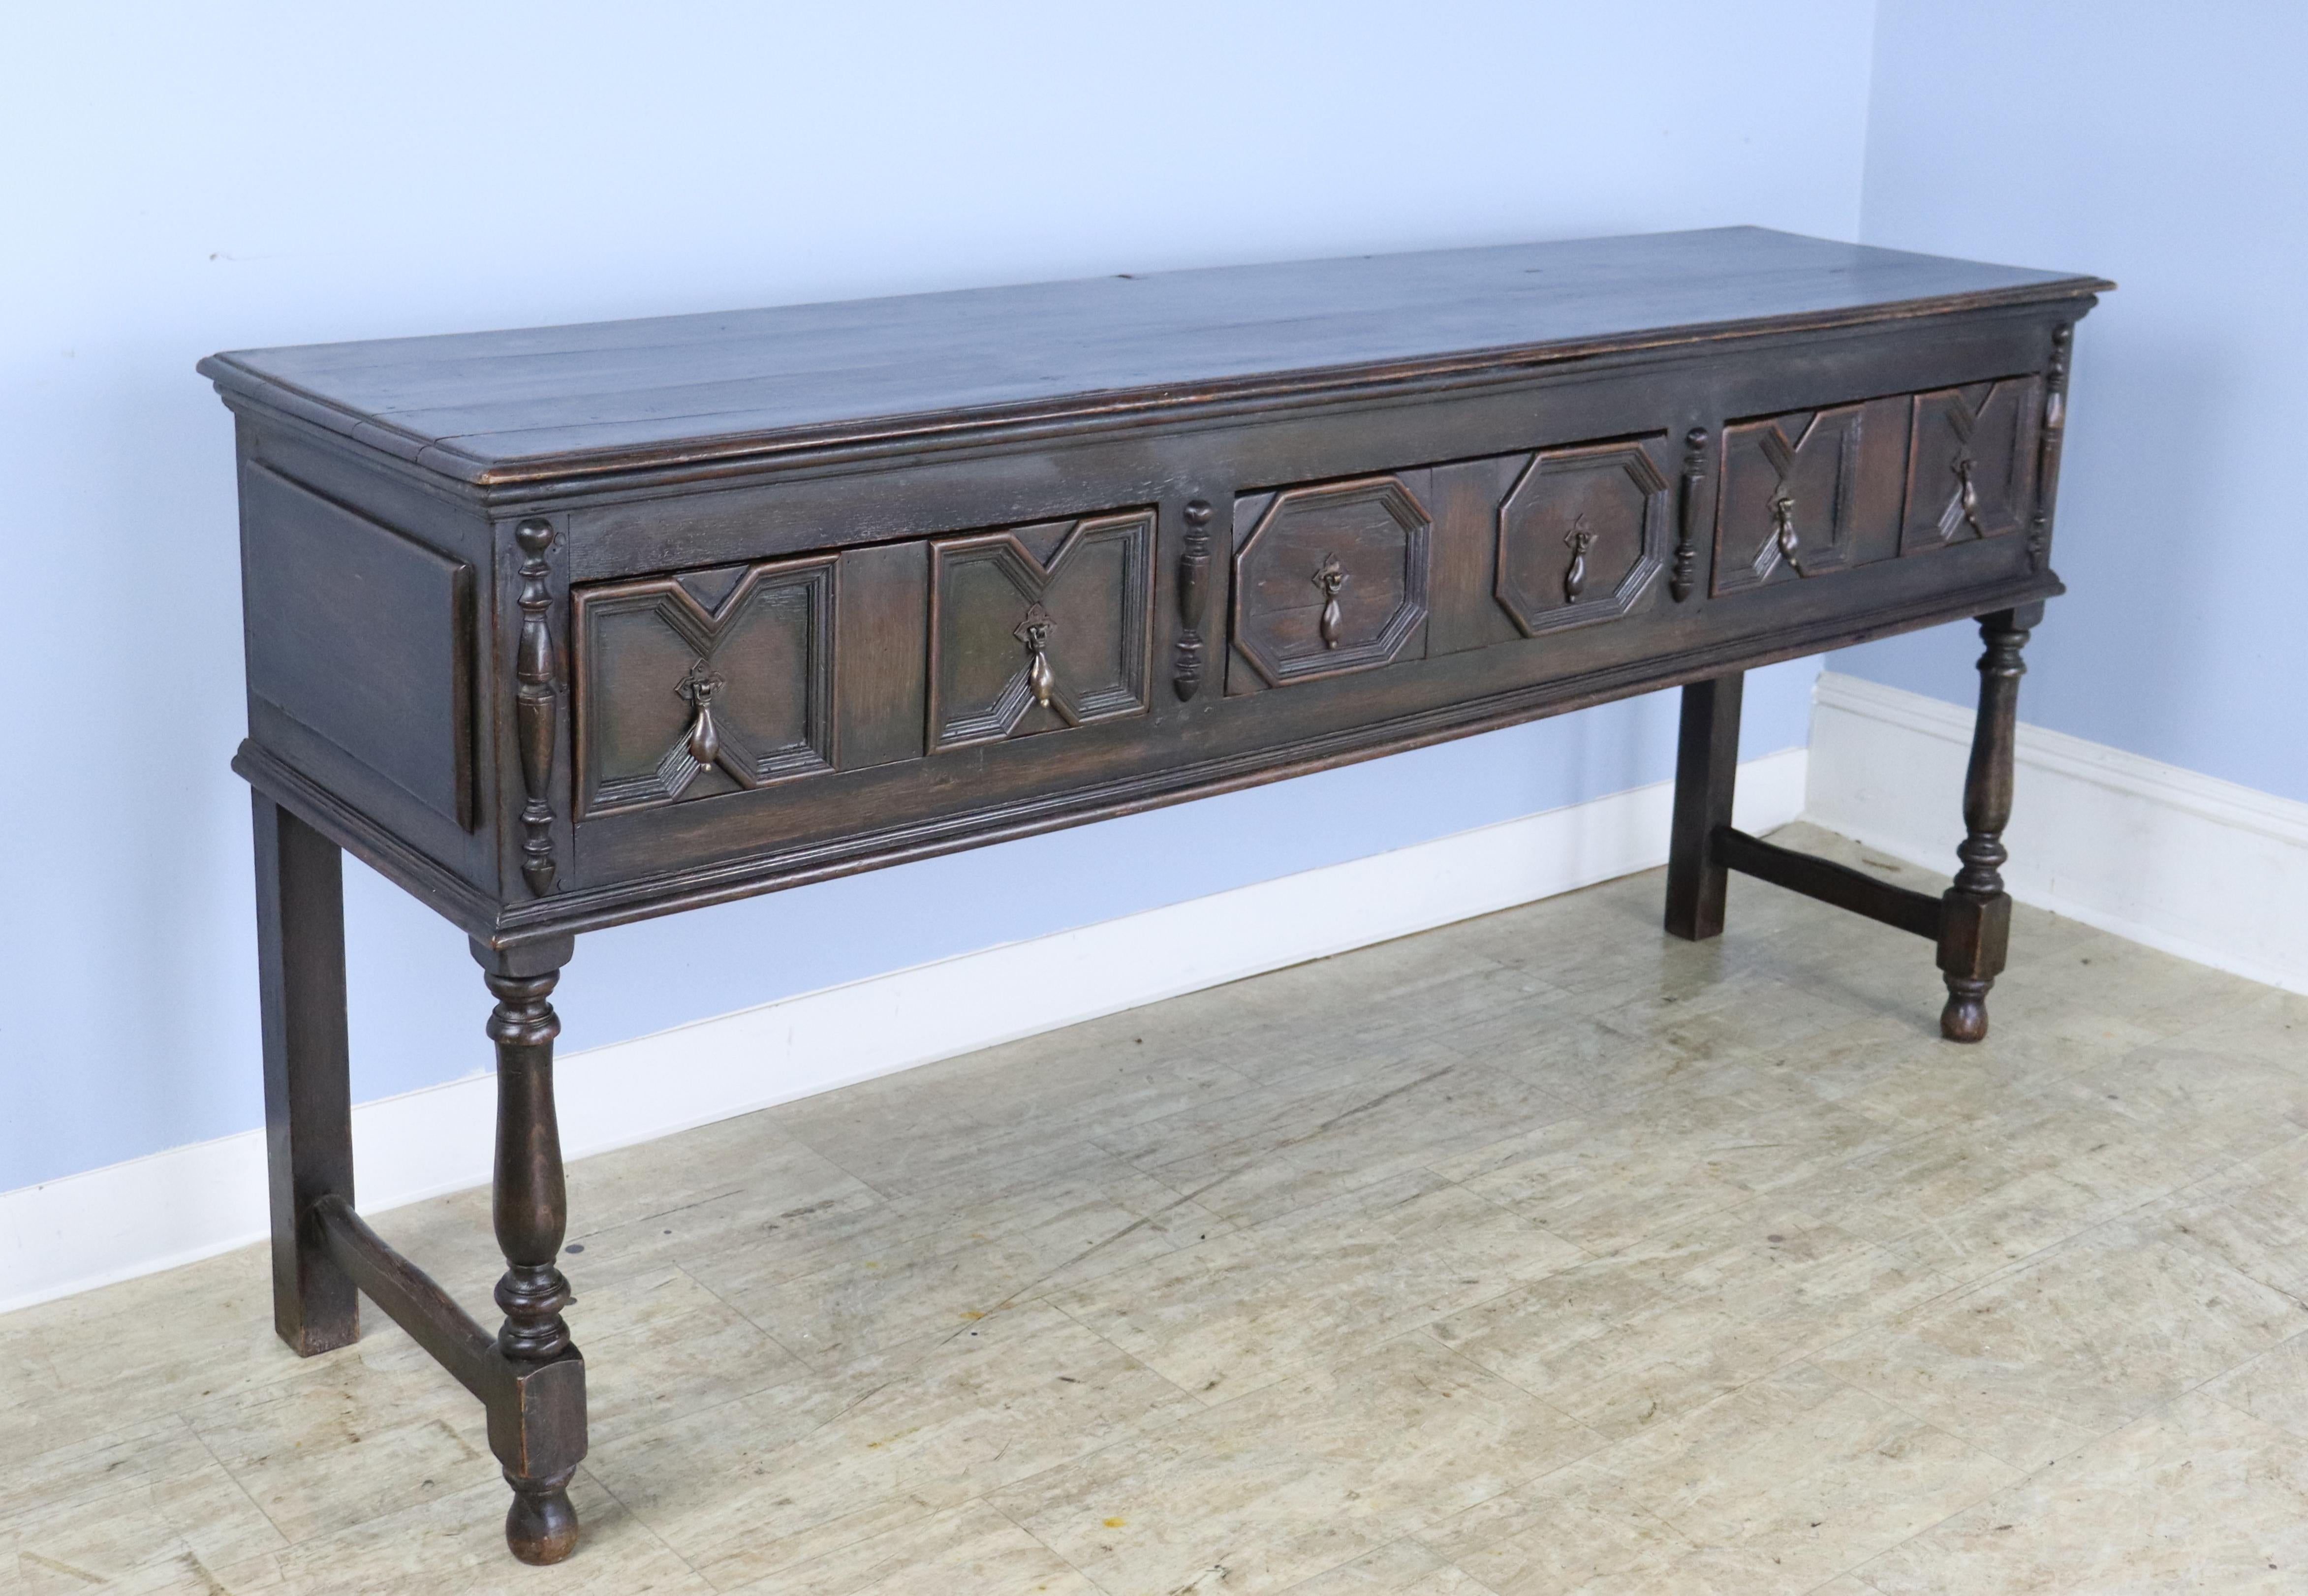 A handsome English dark oak server, console or sideboard with a geomtric pattern on the 3 drawer fronts.  Although this piece is mid 19th Century, it has all the sensibilities of a much earlier period, specifically Jacobean.  Original brass teardrop